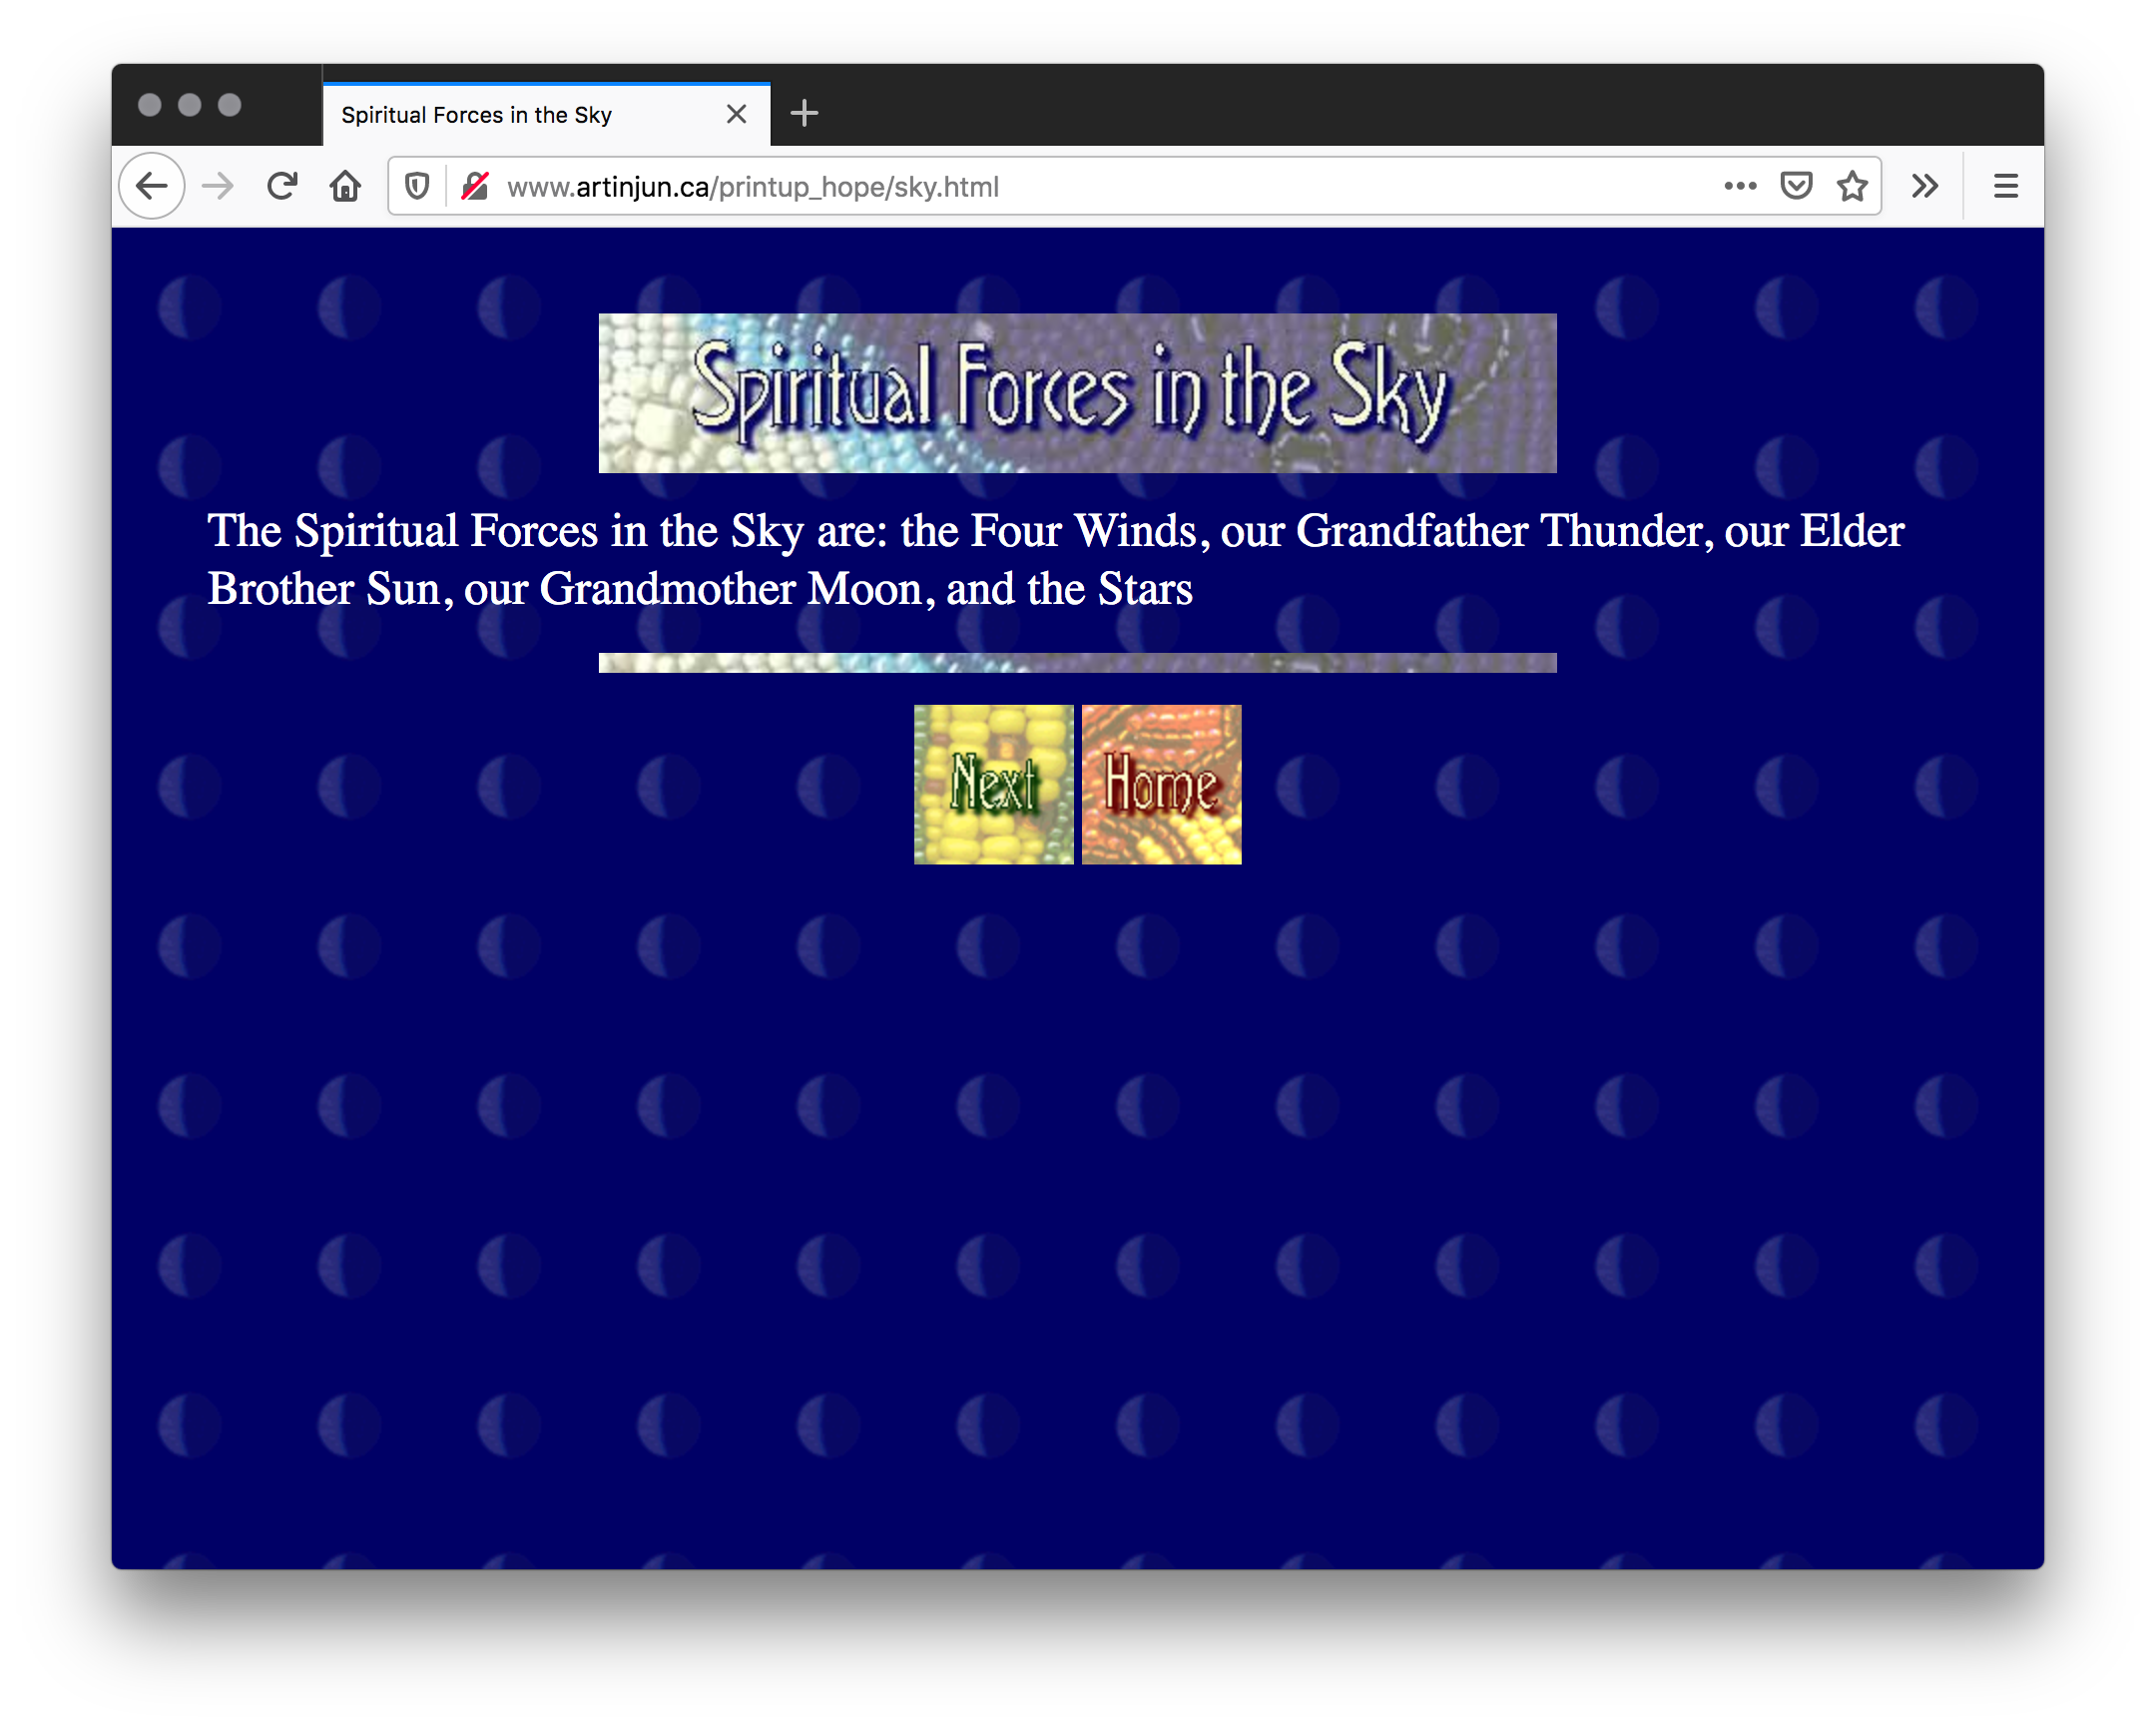 A webpage with two lines of white text and a geometric beaded floral pattern banner with Spiritual Forces in the Sky as the title. Below are a "Next" and "Home" button in squares. The background is blue with tiles of graphic half moons.